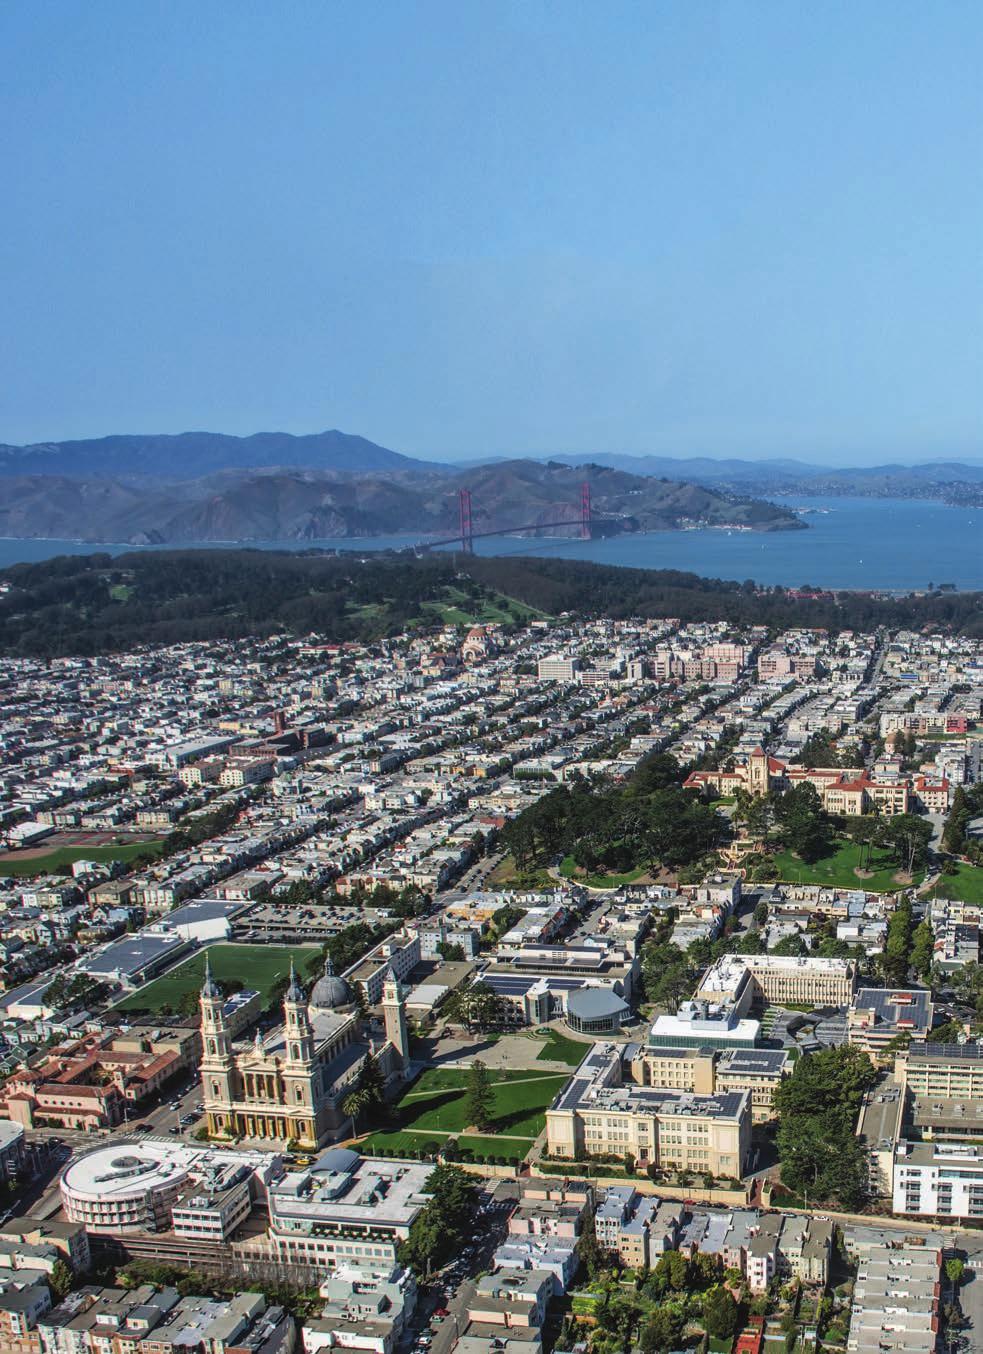 A WORLD OF OPPORTUNITY With modern facilities situated in a world-class city, there is no better place to study law than at the University of San Francisco.